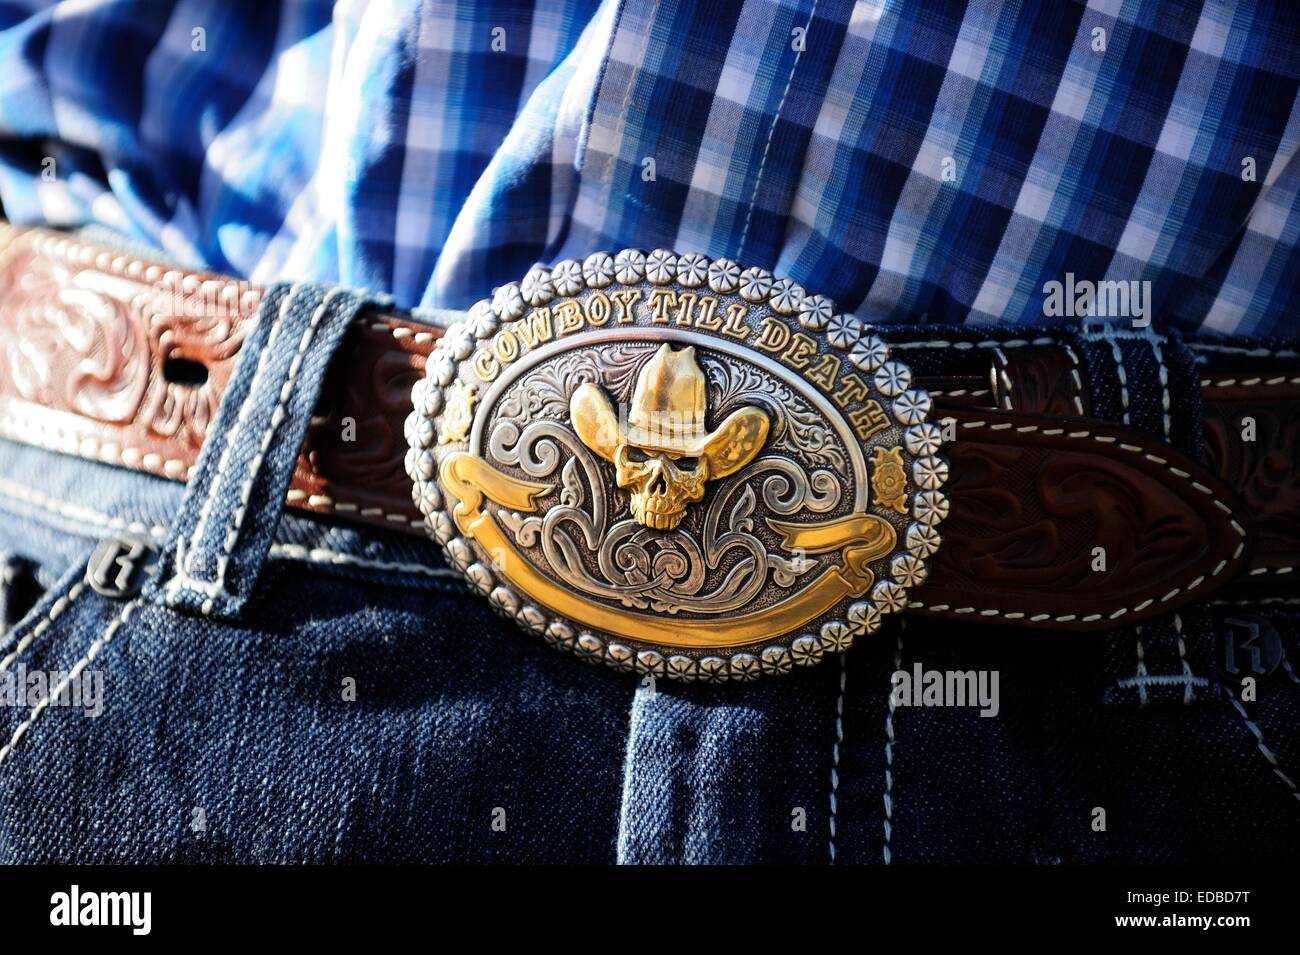 NEW WESTERN STAR STATE OF TEXAS WHITE AND GOLD RODEO FLAG COWBOY BELT BUCKLE